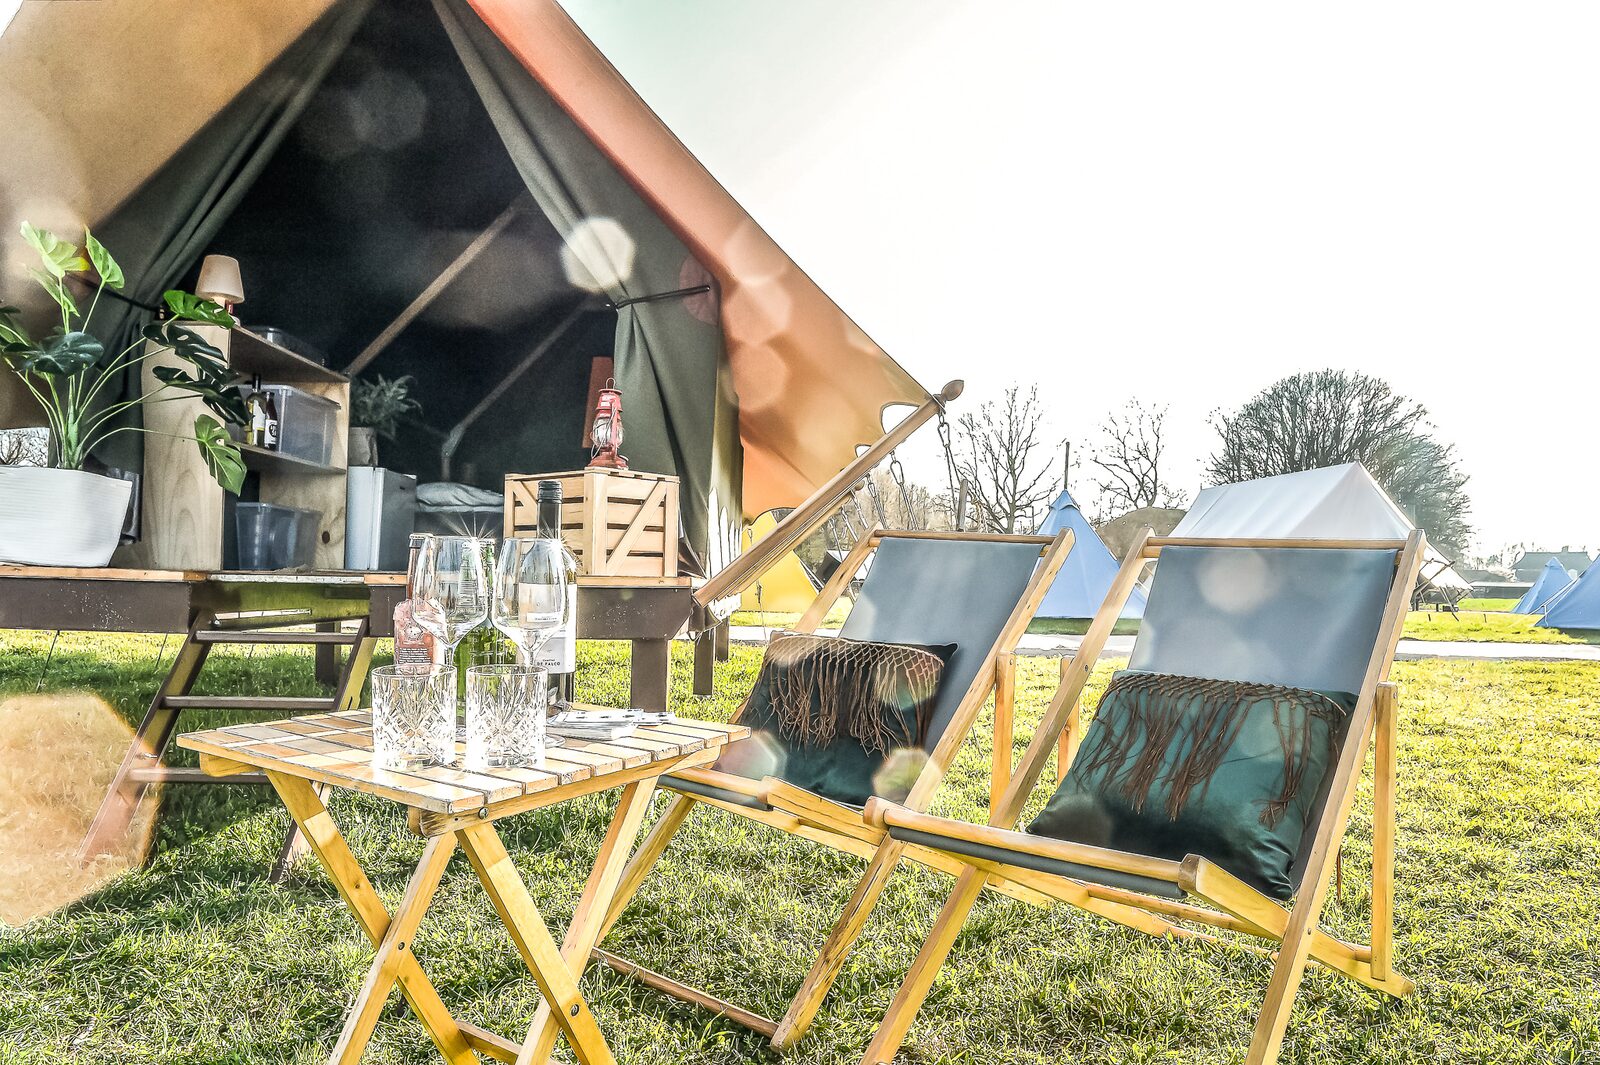 Pop-up glamping